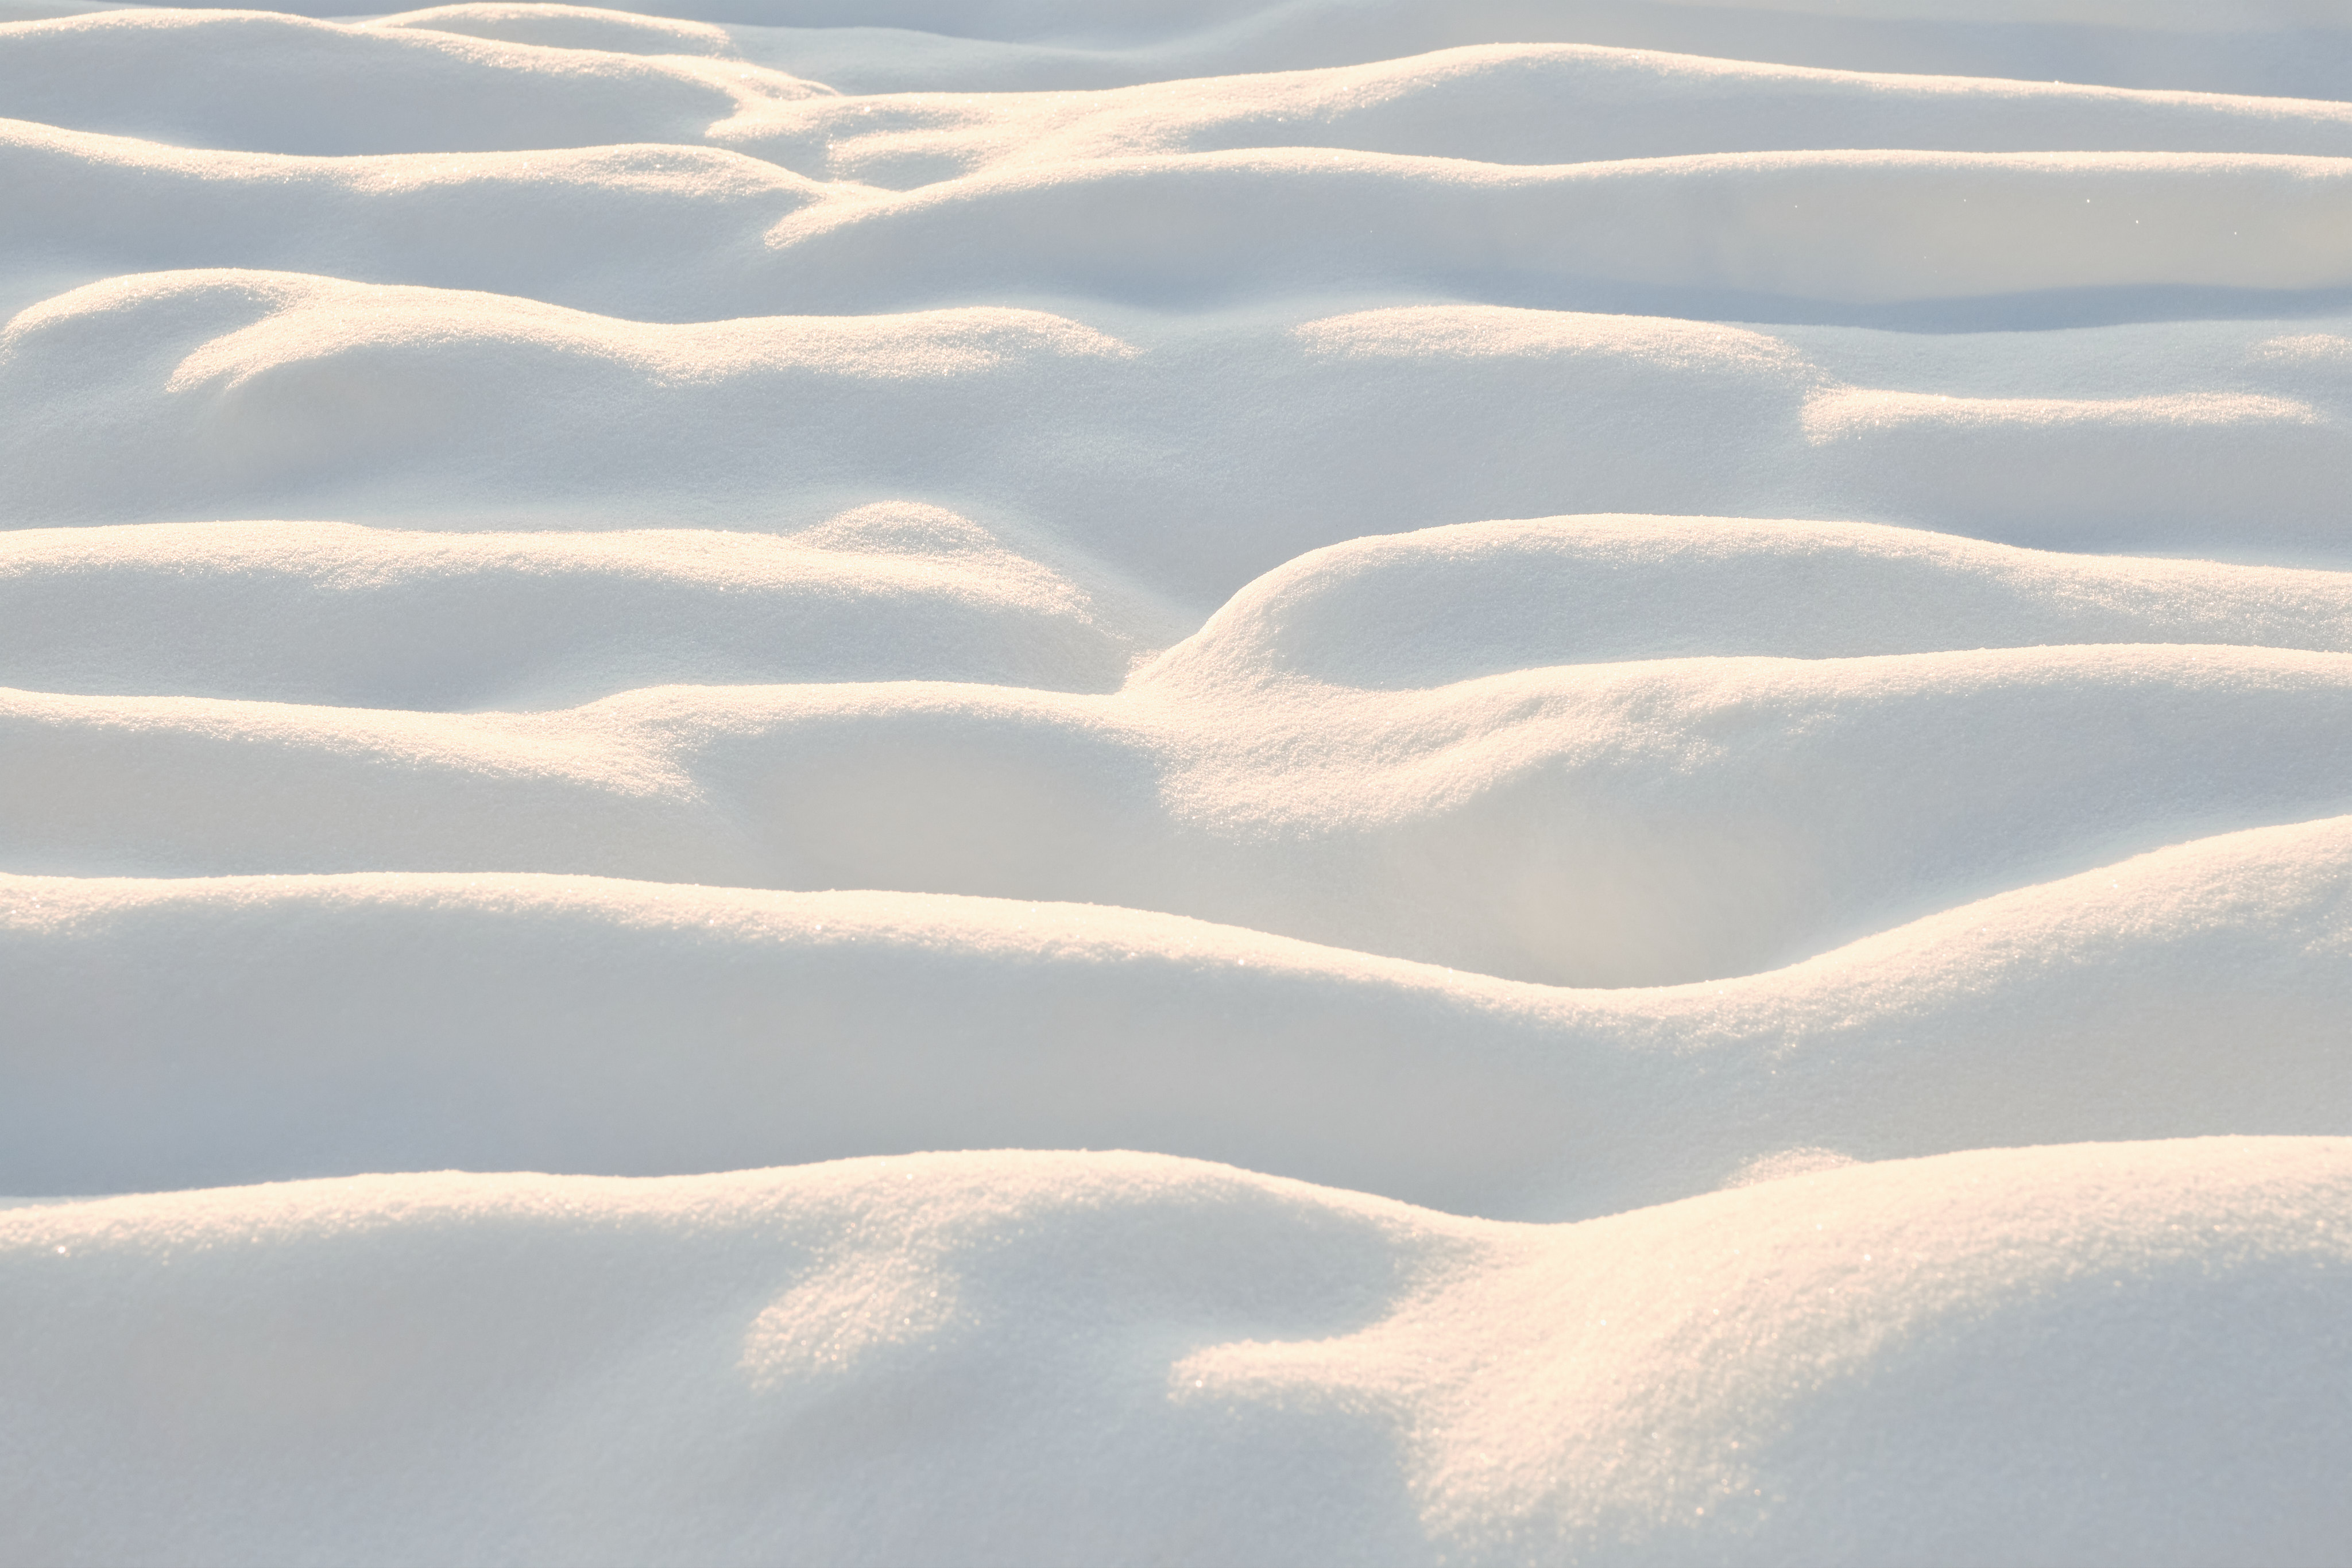 A detail of wavey snow shaped by the wind.